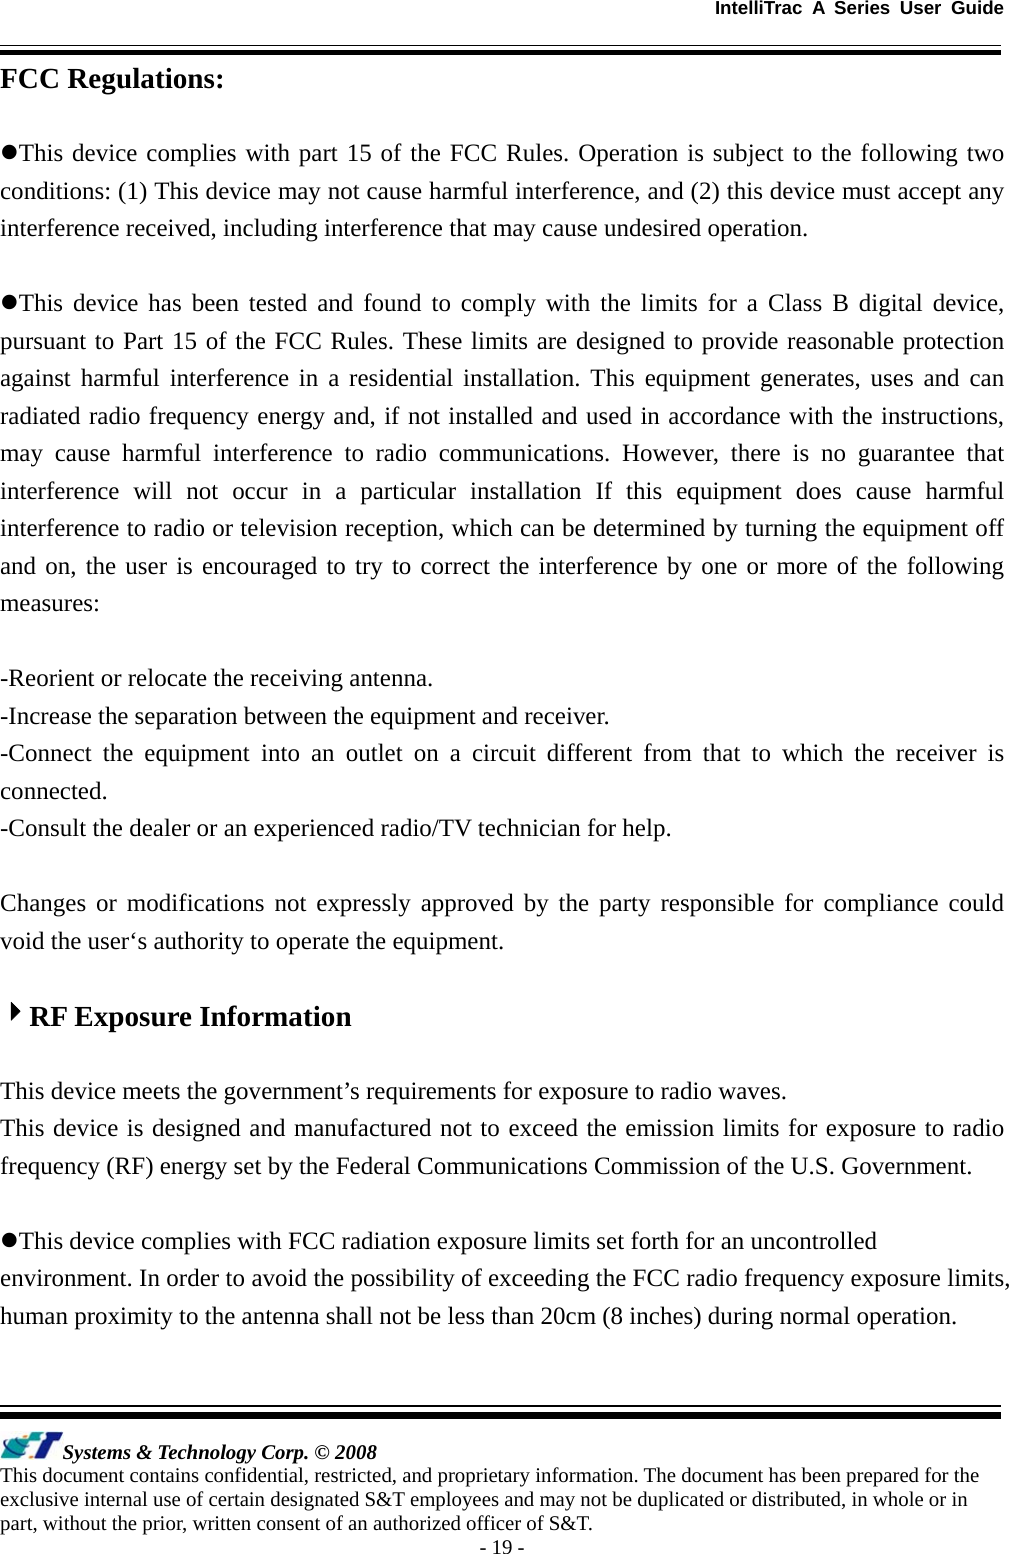  IntelliTrac A Series User Guide   Systems &amp; Technology Corp. © 2008 This document contains confidential, restricted, and proprietary information. The document has been prepared for the exclusive internal use of certain designated S&amp;T employees and may not be duplicated or distributed, in whole or in part, without the prior, written consent of an authorized officer of S&amp;T. - 19 - FCC Regulations:  zThis device complies with part 15 of the FCC Rules. Operation is subject to the following two conditions: (1) This device may not cause harmful interference, and (2) this device must accept any interference received, including interference that may cause undesired operation.  zThis device has been tested and found to comply with the limits for a Class B digital device, pursuant to Part 15 of the FCC Rules. These limits are designed to provide reasonable protection against harmful interference in a residential installation. This equipment generates, uses and can radiated radio frequency energy and, if not installed and used in accordance with the instructions, may cause harmful interference to radio communications. However, there is no guarantee that interference will not occur in a particular installation If this equipment does cause harmful interference to radio or television reception, which can be determined by turning the equipment off and on, the user is encouraged to try to correct the interference by one or more of the following measures:  -Reorient or relocate the receiving antenna. -Increase the separation between the equipment and receiver. -Connect the equipment into an outlet on a circuit different from that to which the receiver is connected. -Consult the dealer or an experienced radio/TV technician for help.  Changes or modifications not expressly approved by the party responsible for compliance could void the user‘s authority to operate the equipment.  4RF Exposure Information  This device meets the government’s requirements for exposure to radio waves. This device is designed and manufactured not to exceed the emission limits for exposure to radio frequency (RF) energy set by the Federal Communications Commission of the U.S. Government.  zThis device complies with FCC radiation exposure limits set forth for an uncontrolled environment. In order to avoid the possibility of exceeding the FCC radio frequency exposure limits, human proximity to the antenna shall not be less than 20cm (8 inches) during normal operation. 